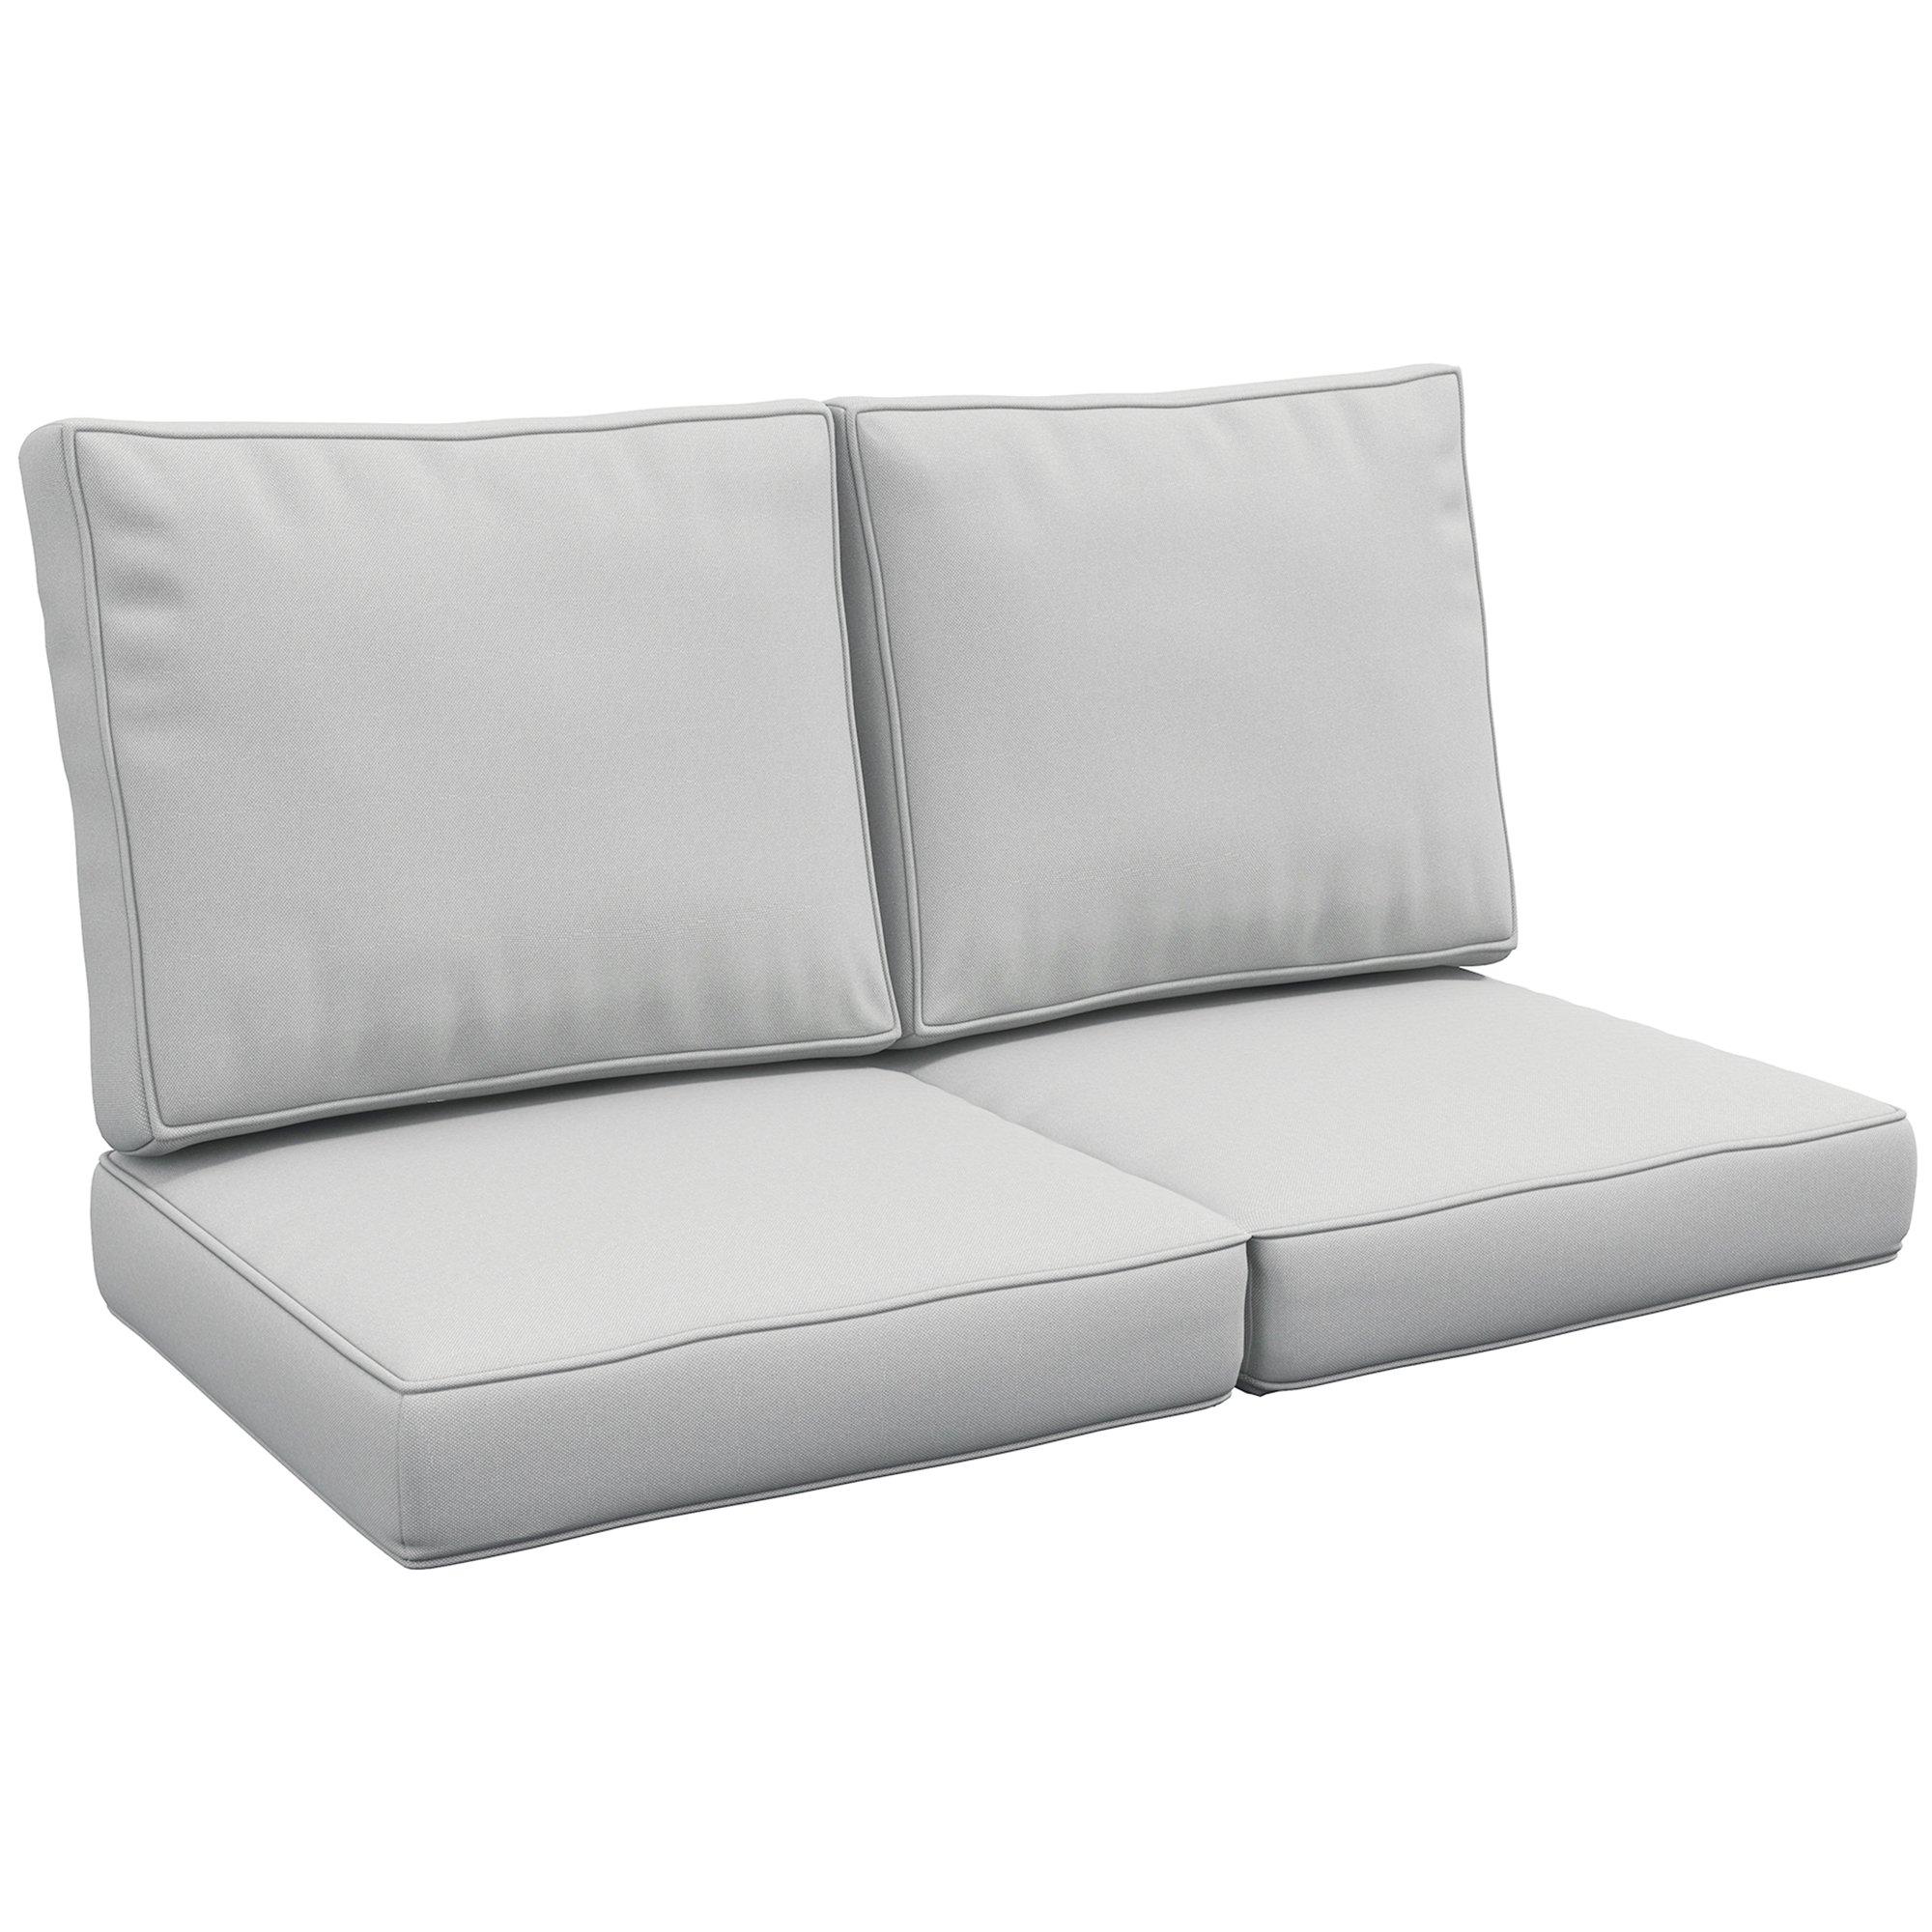 Set of 3 Replacement Back and Seat Cushions for Outdoor